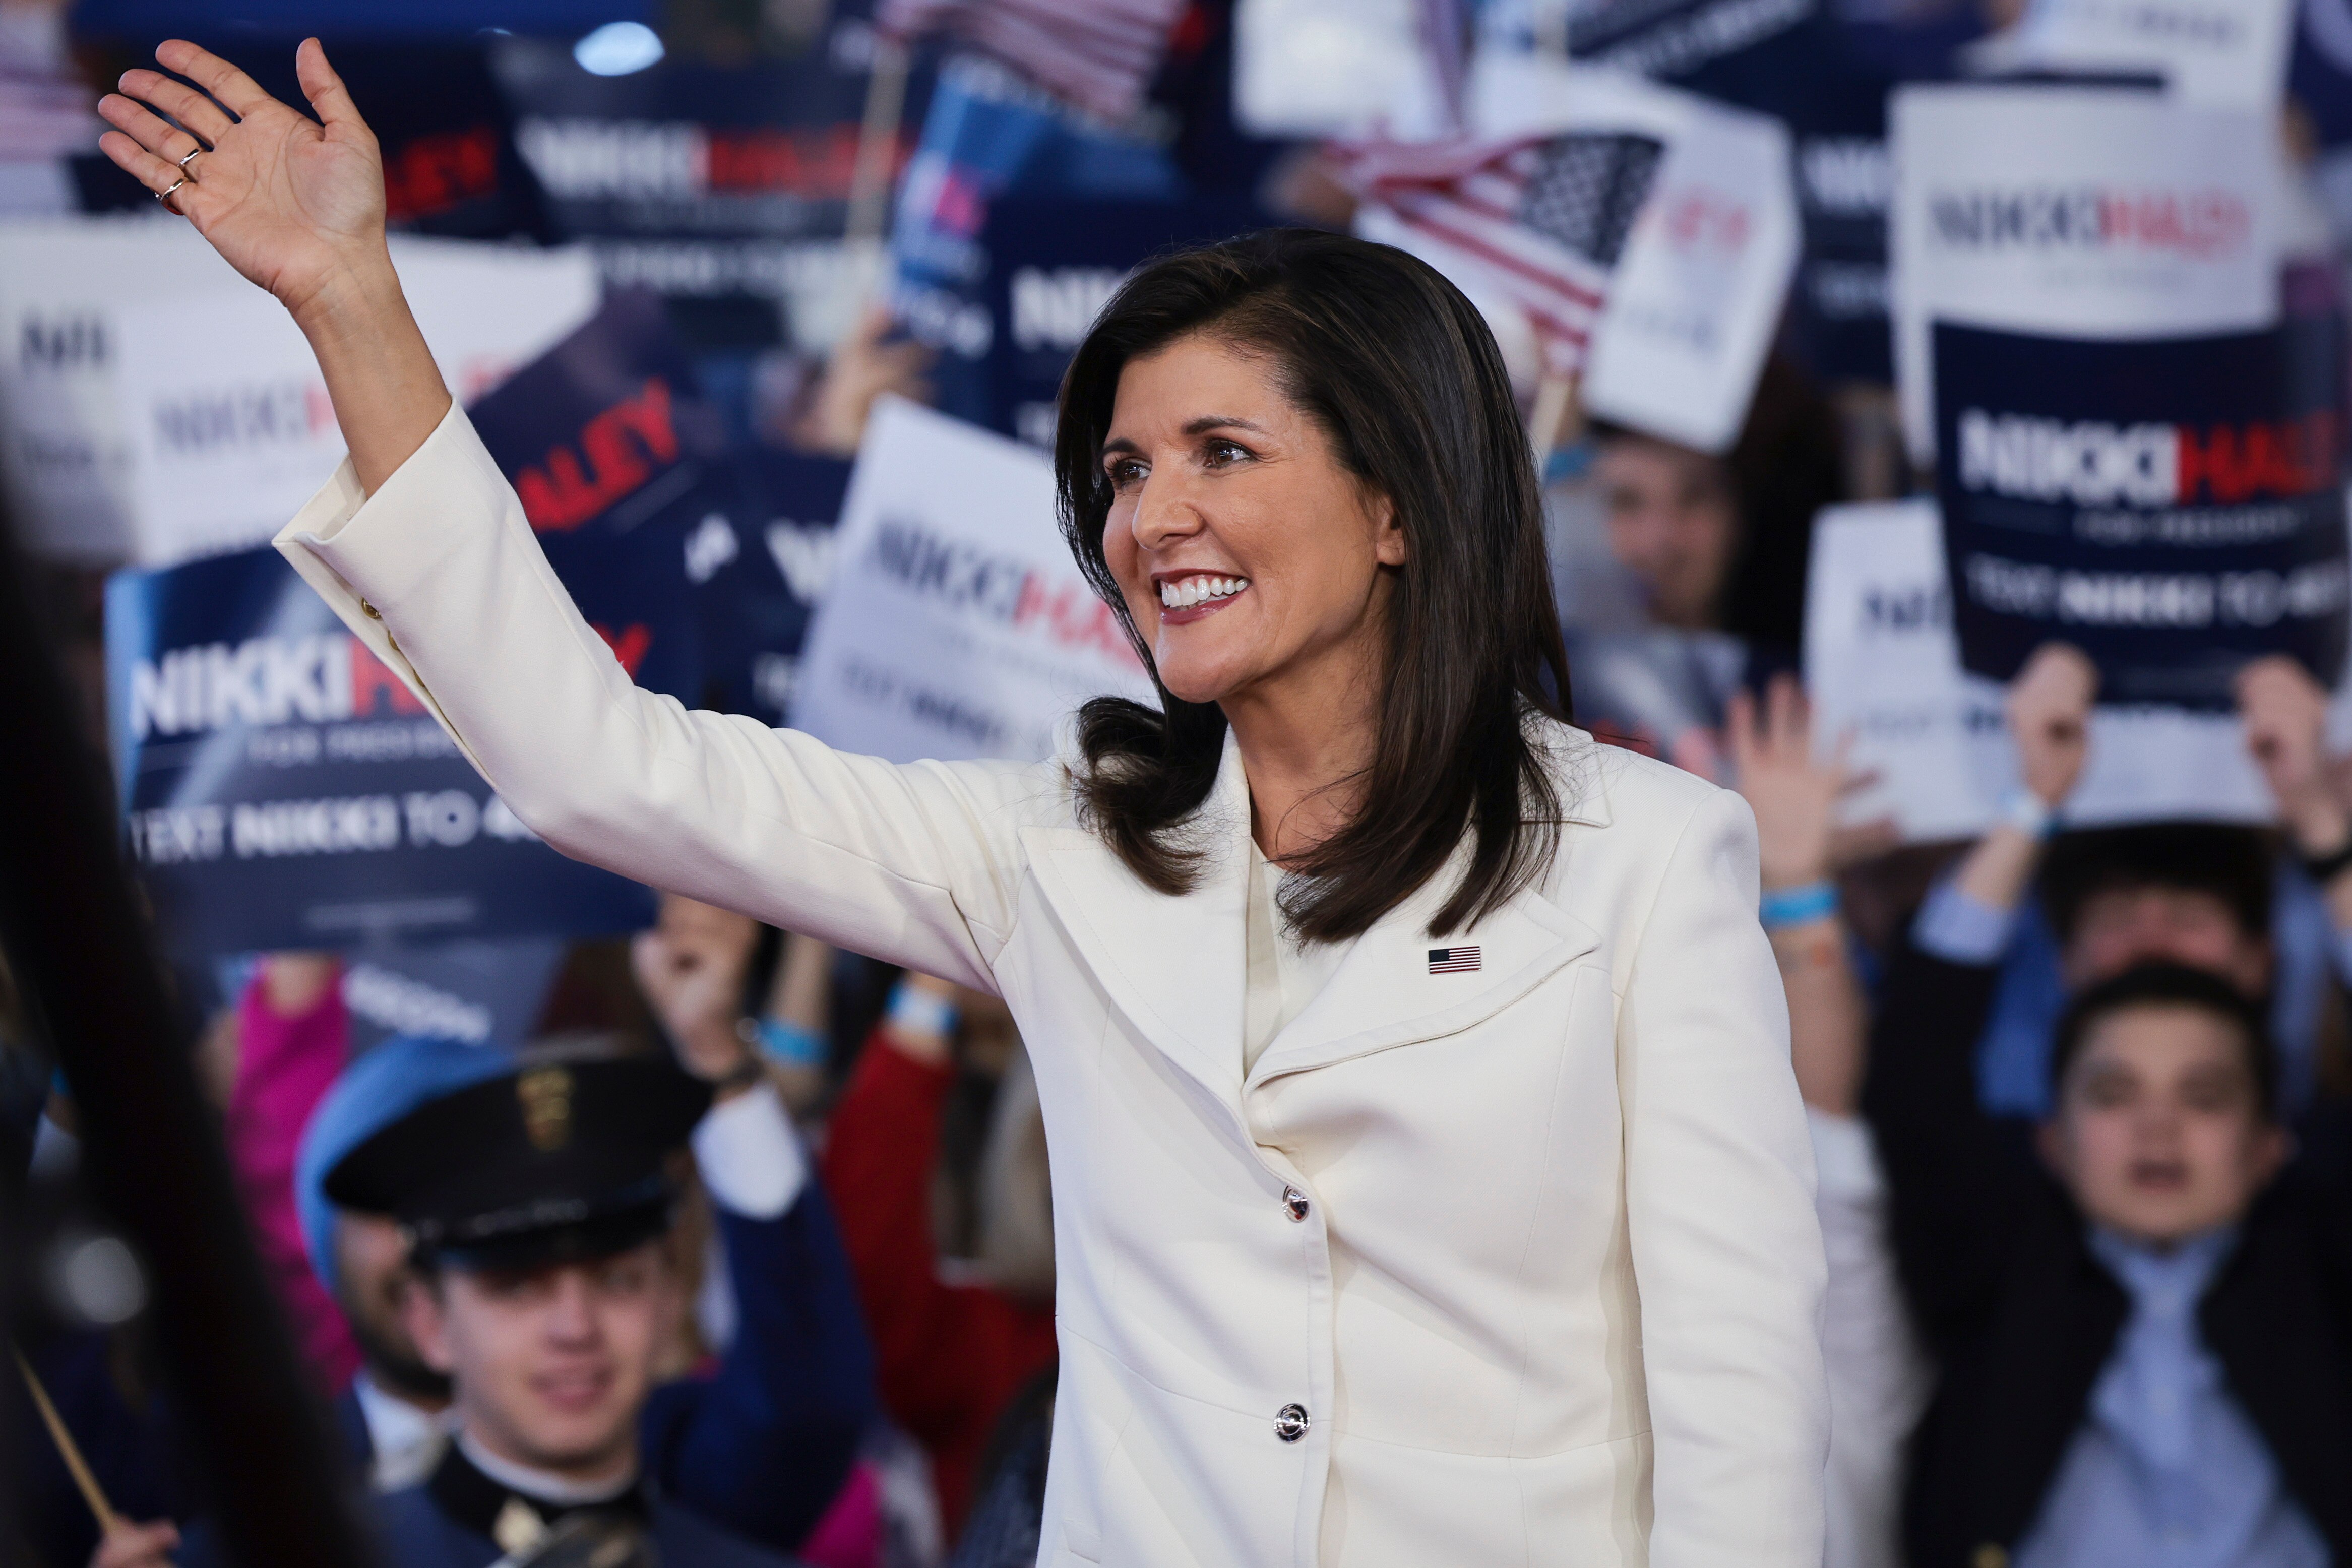 Why presidential candidate Nikki Haley's faith background is capturing attention